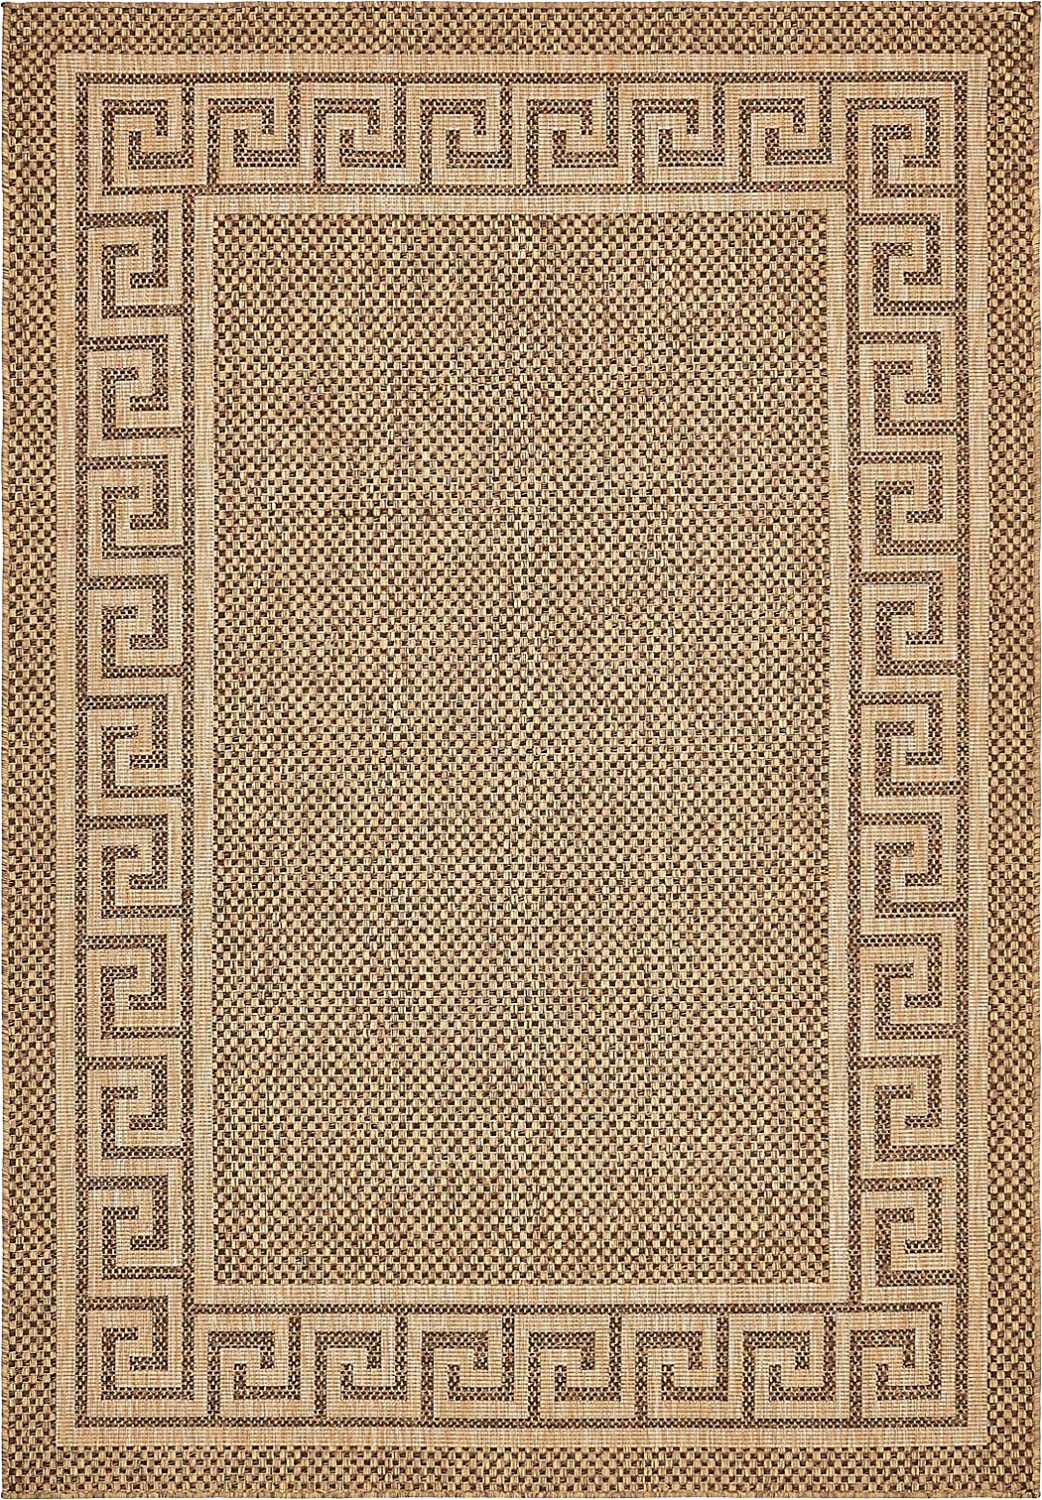 9 Foot Square area Rug Outdoor Collection area Rug Brown 6 X 9 Feet Perfect for Indoor & Outdoor Rugs Garden and Pool area Camping Picnic Carpet